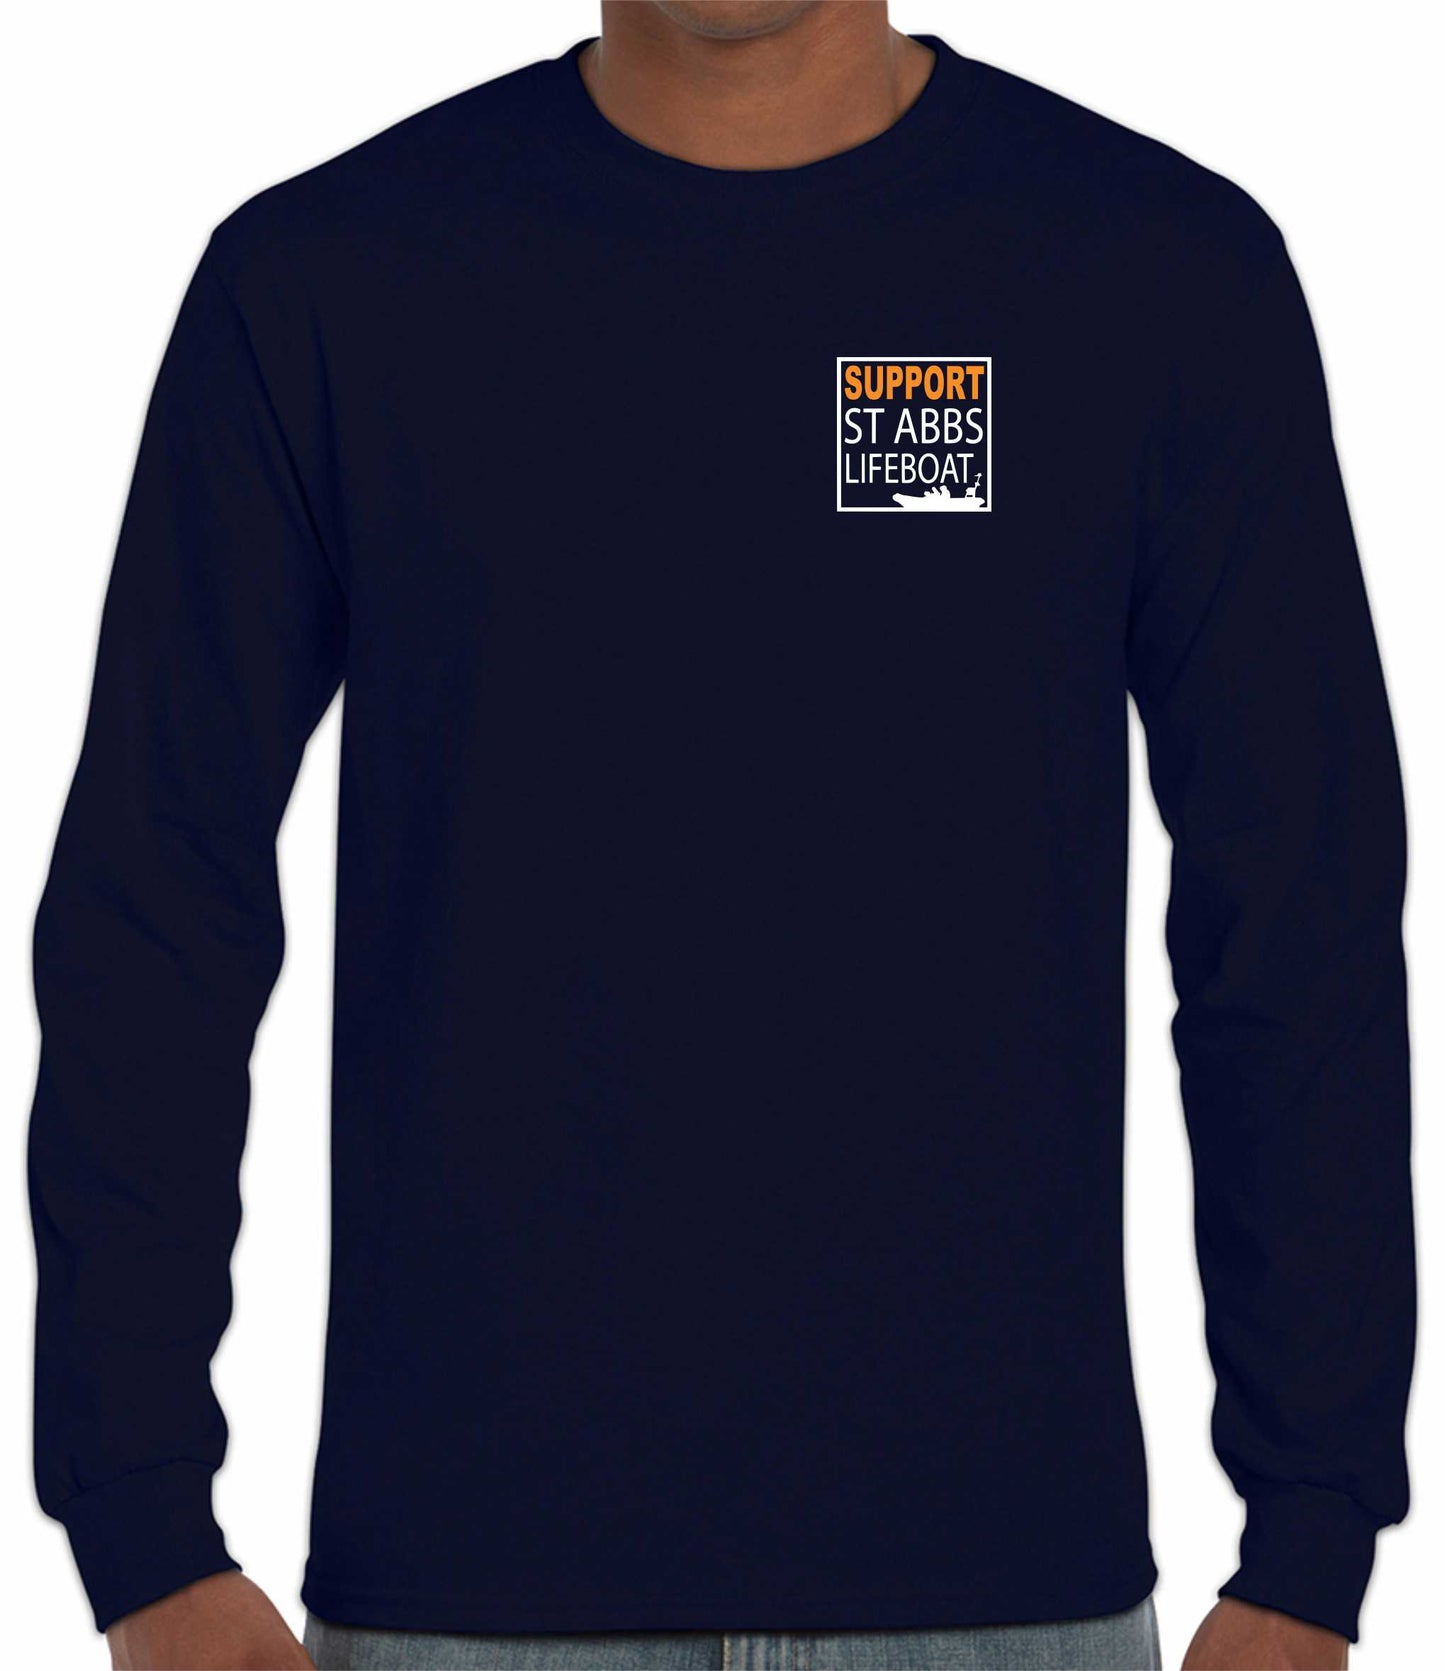 St Abbs Lifeboat Long Sleeved T-Shirt - Mens fit